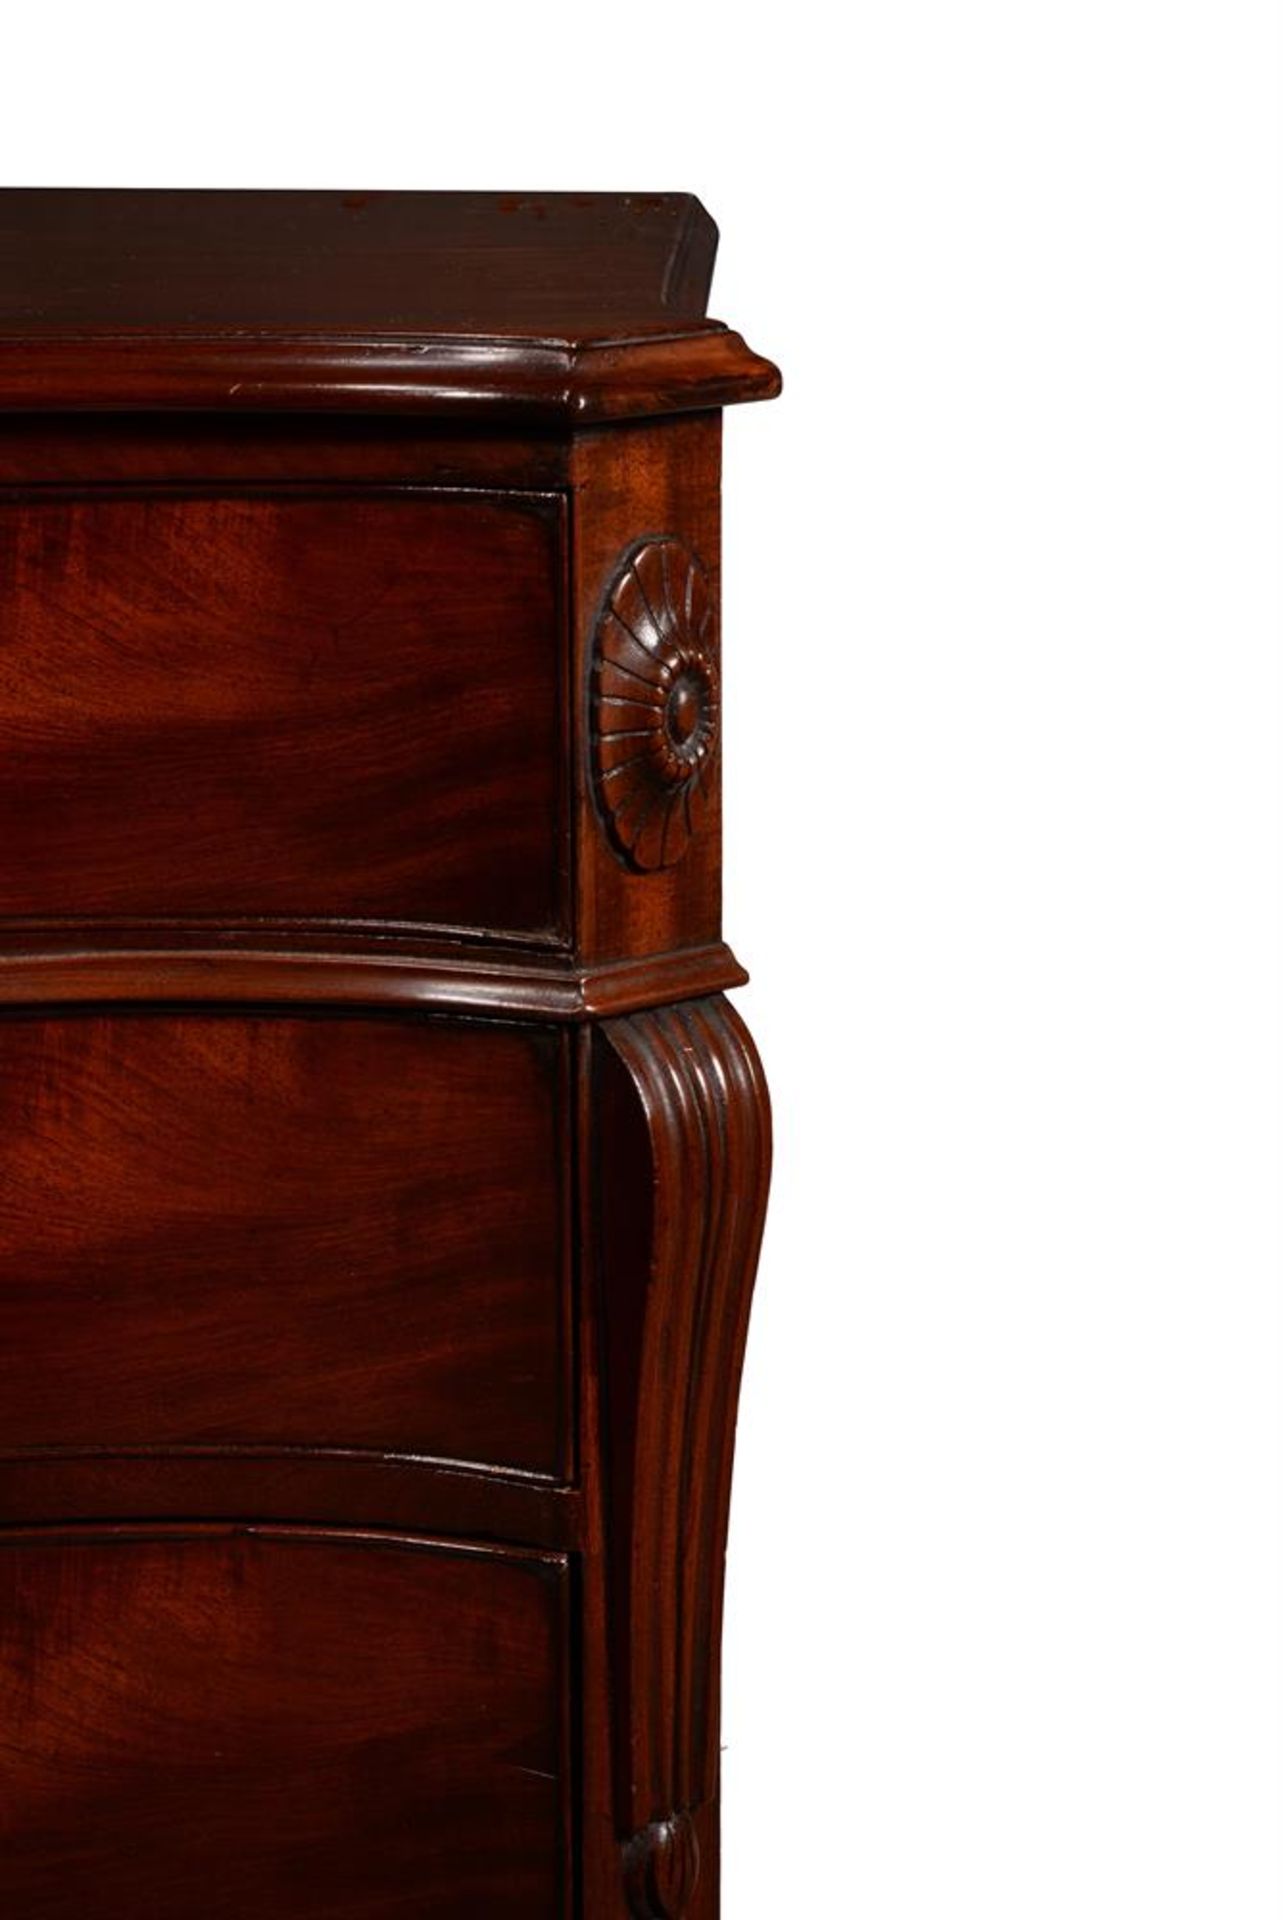 A GEORGE III MAHOGANY SERPENTINE COMMODE, IN THE MANNER OF THOMAS CHIPPENDALE, CIRCA 1770 - Image 9 of 9